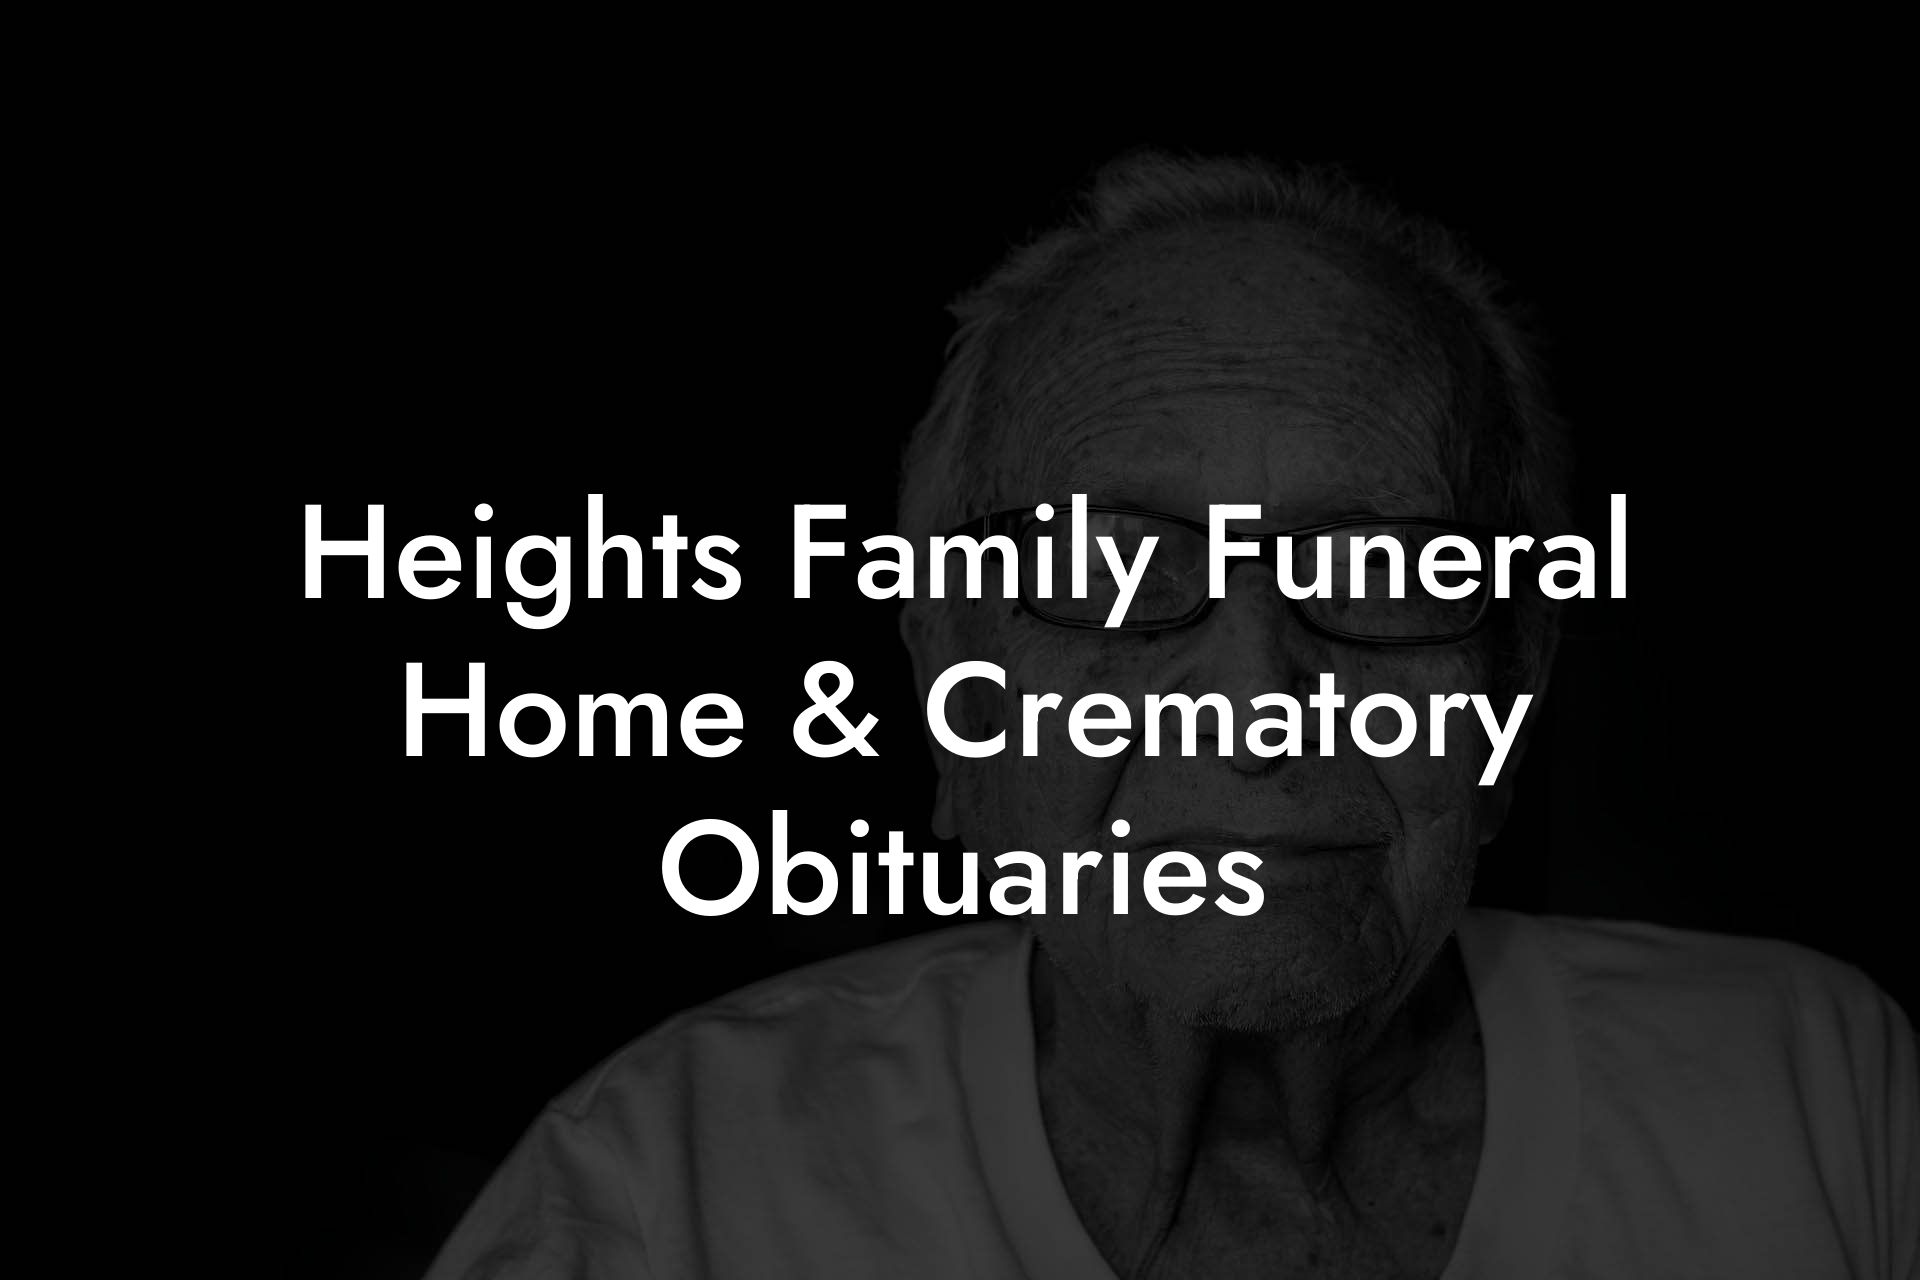 Heights Family Funeral Home & Crematory Obituaries